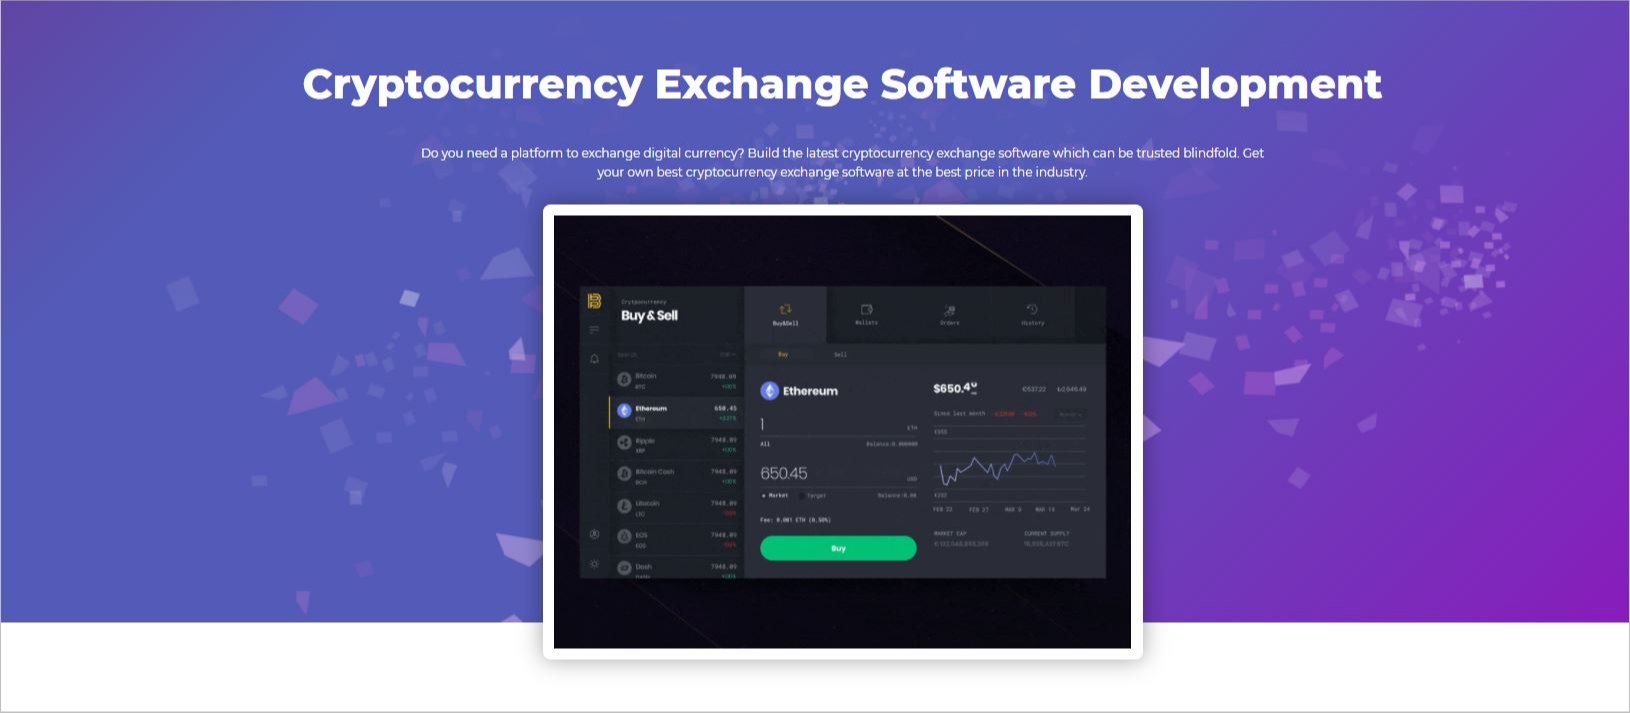 Best Cryptocurrency Exchange Software - Reviews & Pricing